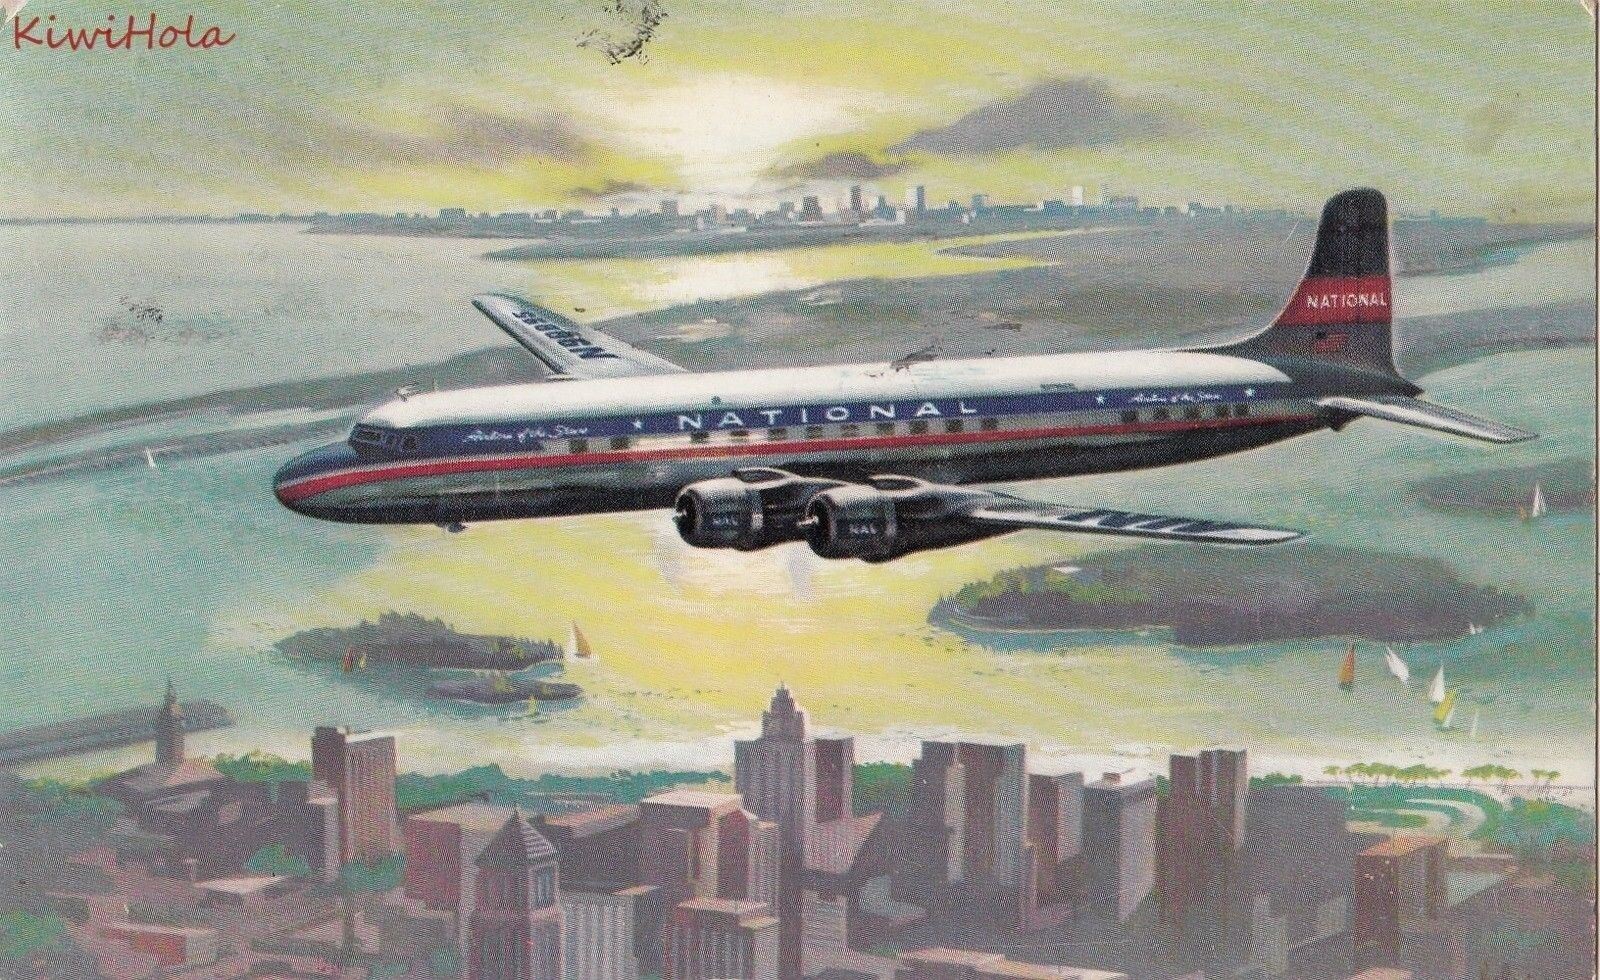 Postcard Airplane National Star Airlines